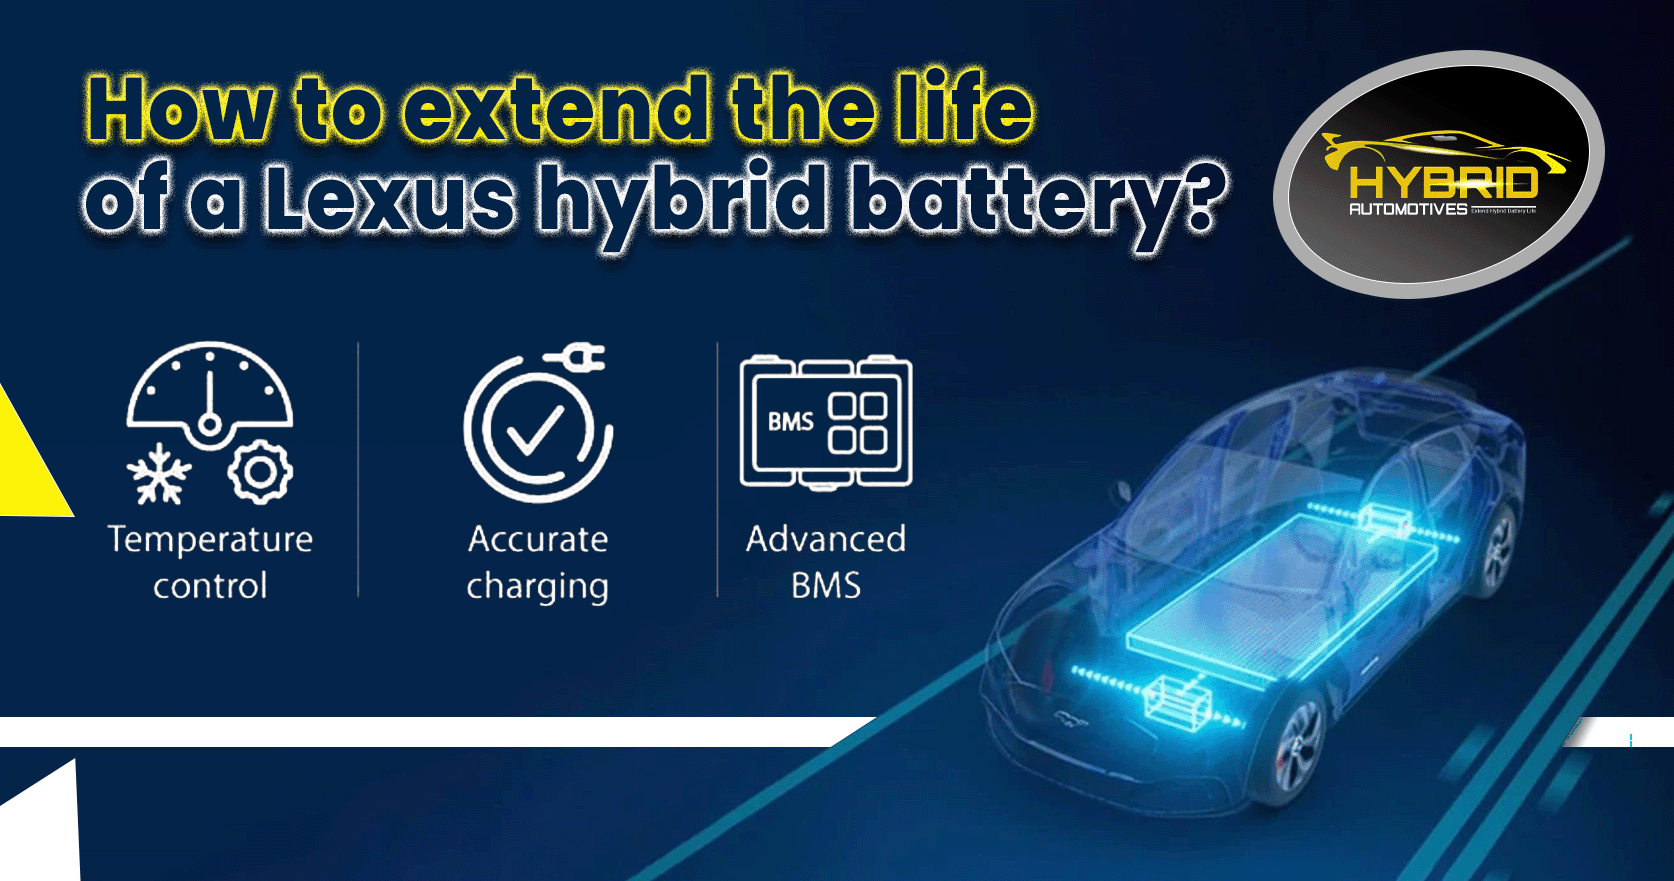 How to extend the life of a Lexus hybrid battery